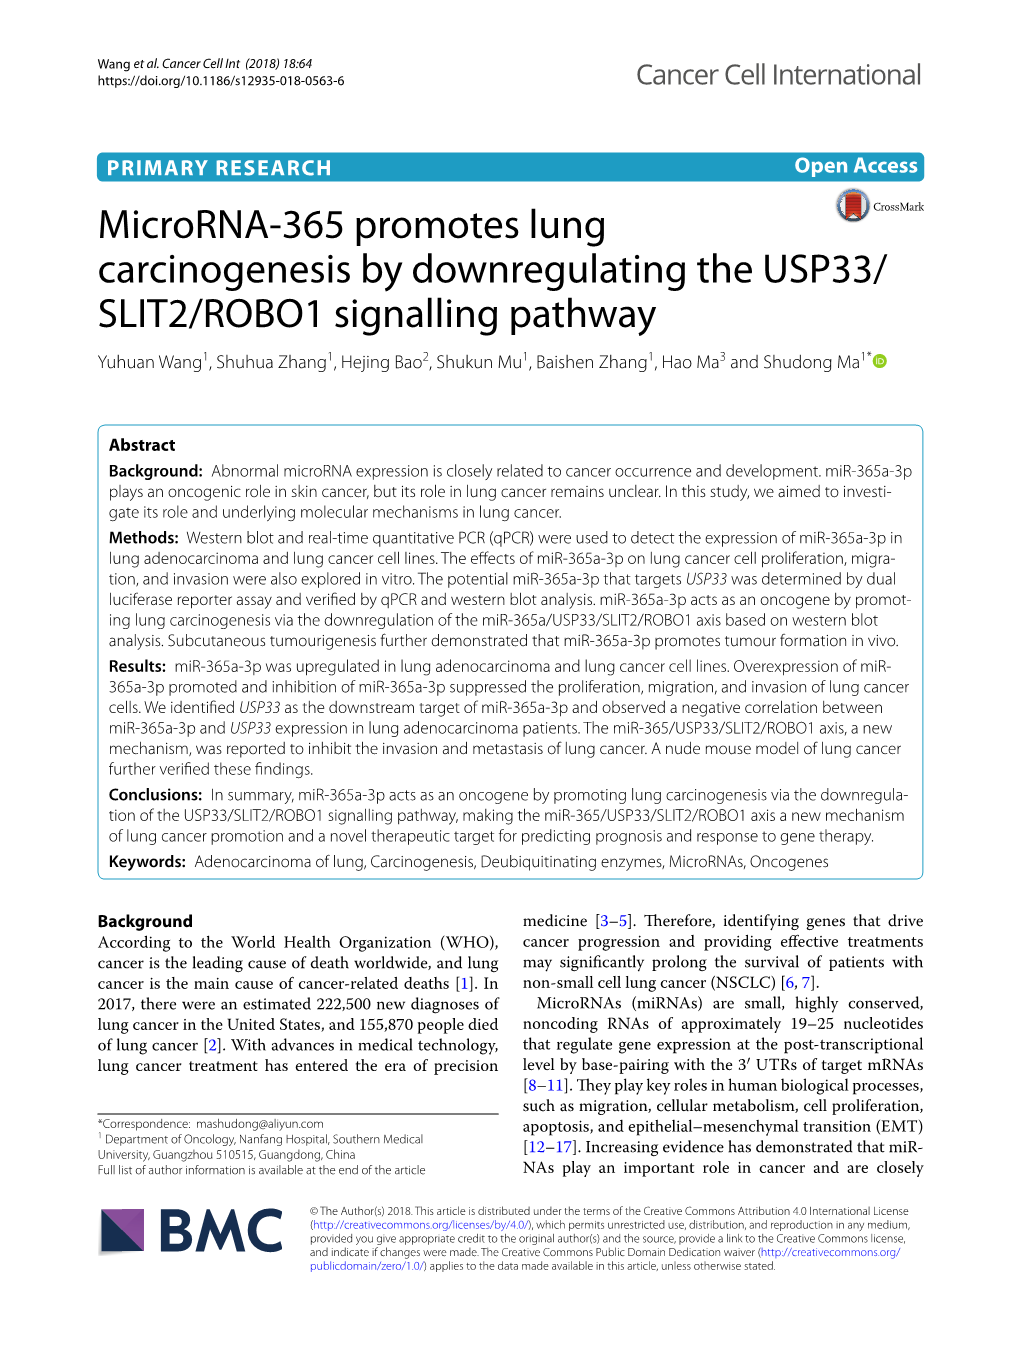 Microrna-365 Promotes Lung Carcinogenesis by Downregulating the USP33/SLIT2/ROBO1 Signalling Pathway